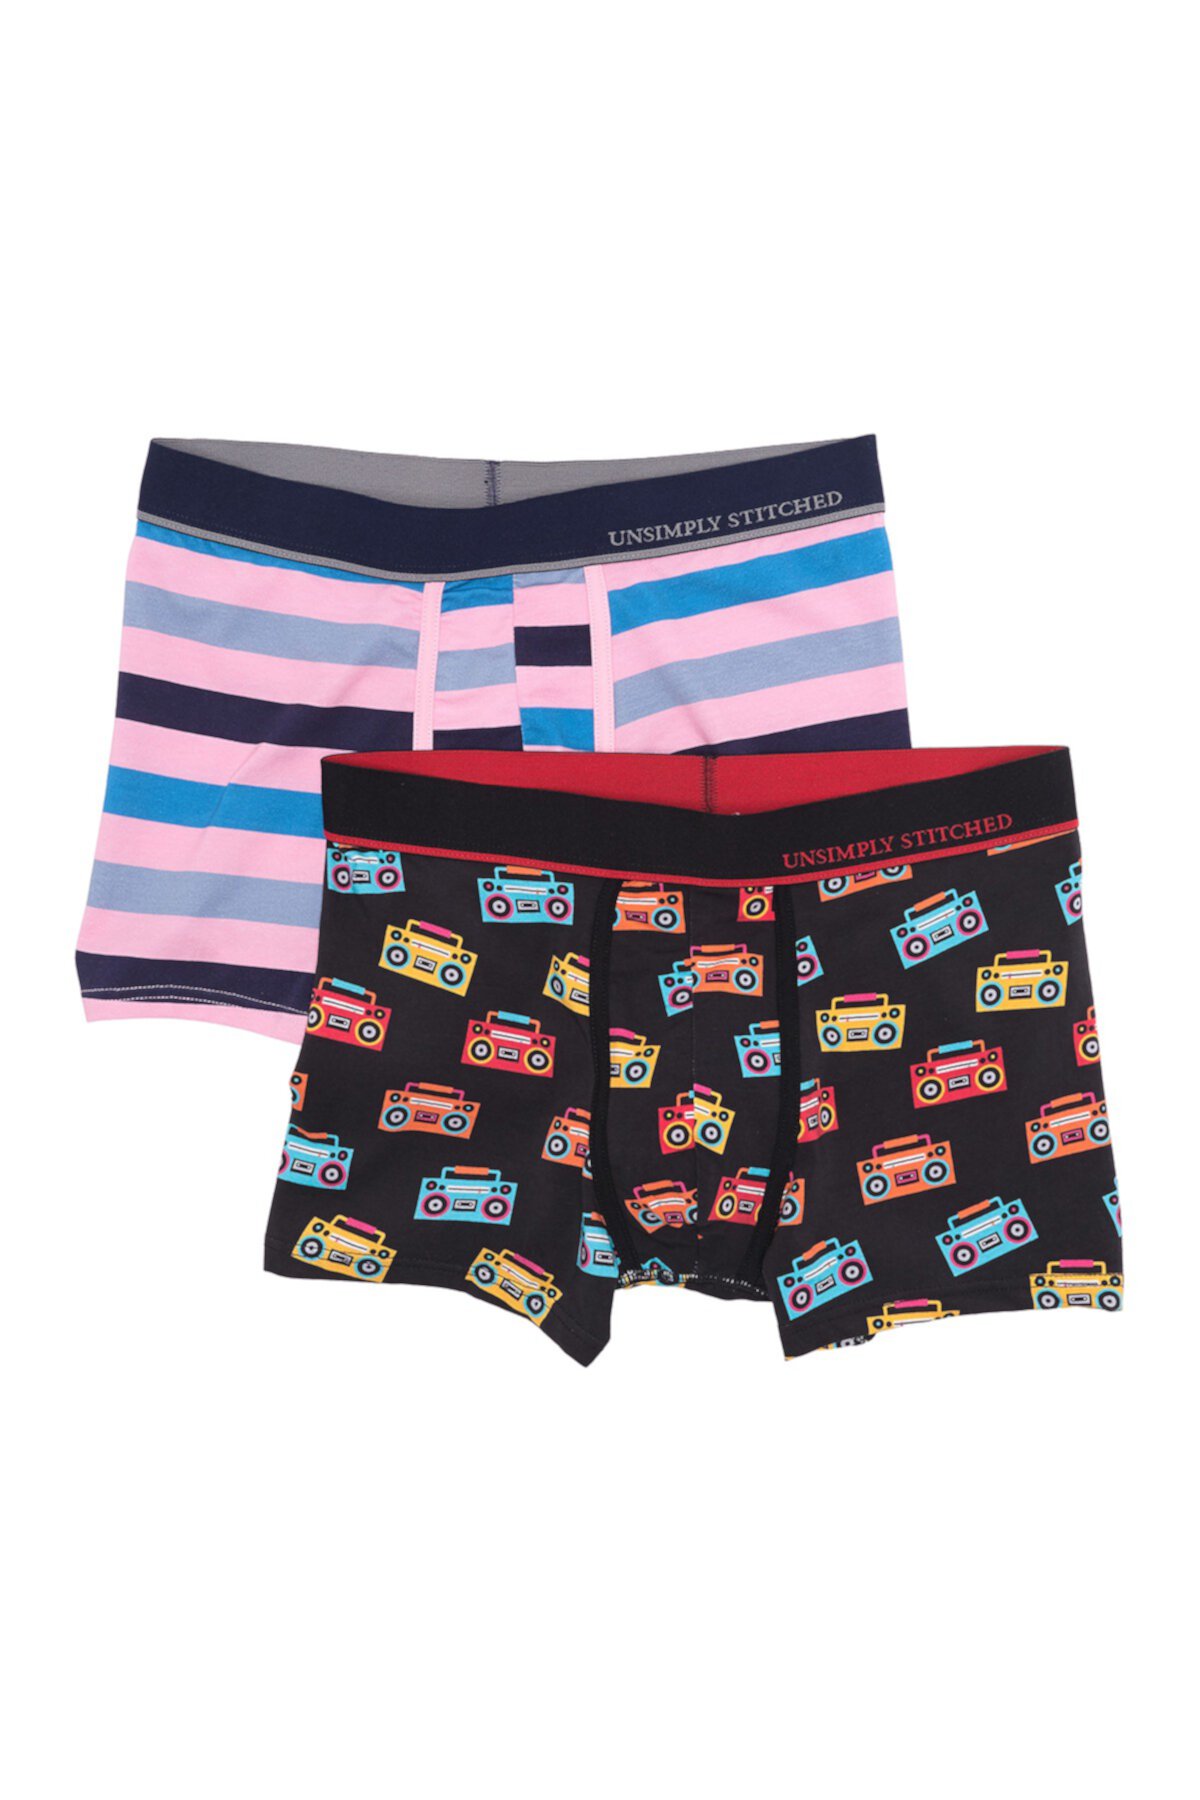 Printed Stretch Boxer Brief Trunk - Pack of 2 Unsimply Stitched